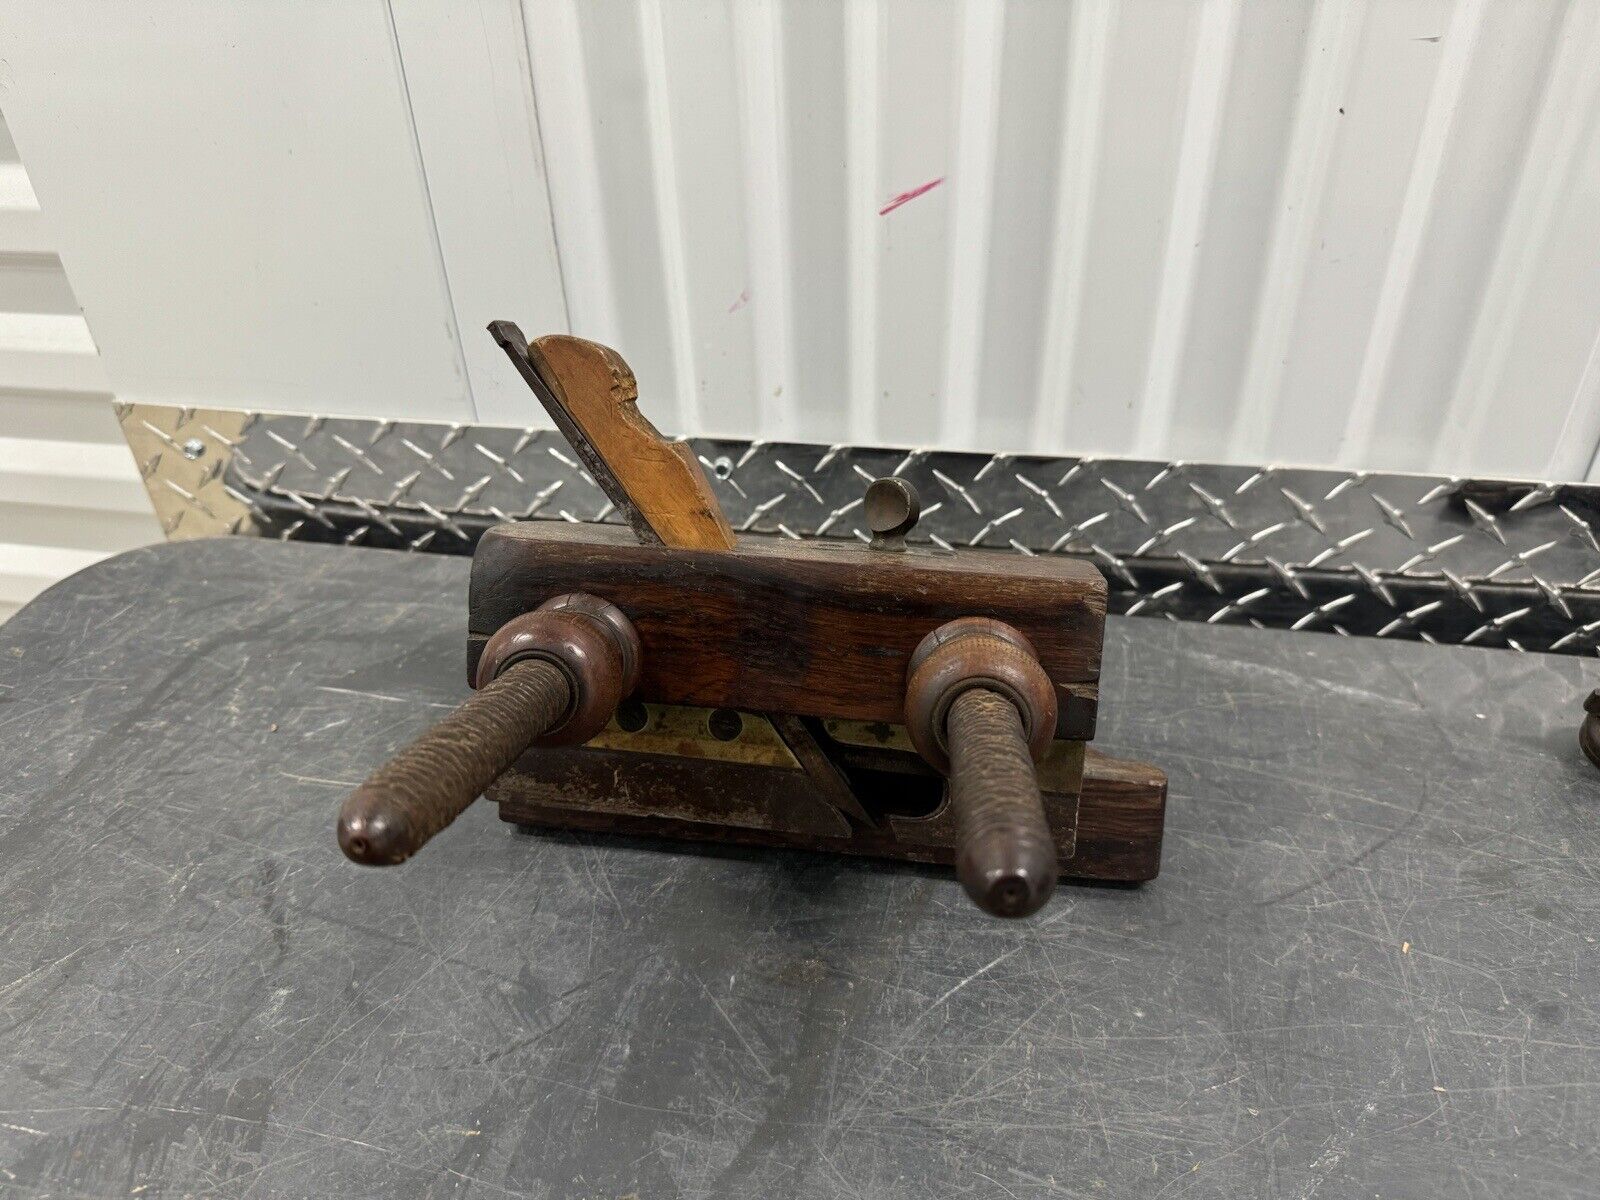 Antique J.F. RANSOM? Rosewood Plow Plane circa 1840 Watertown, NY